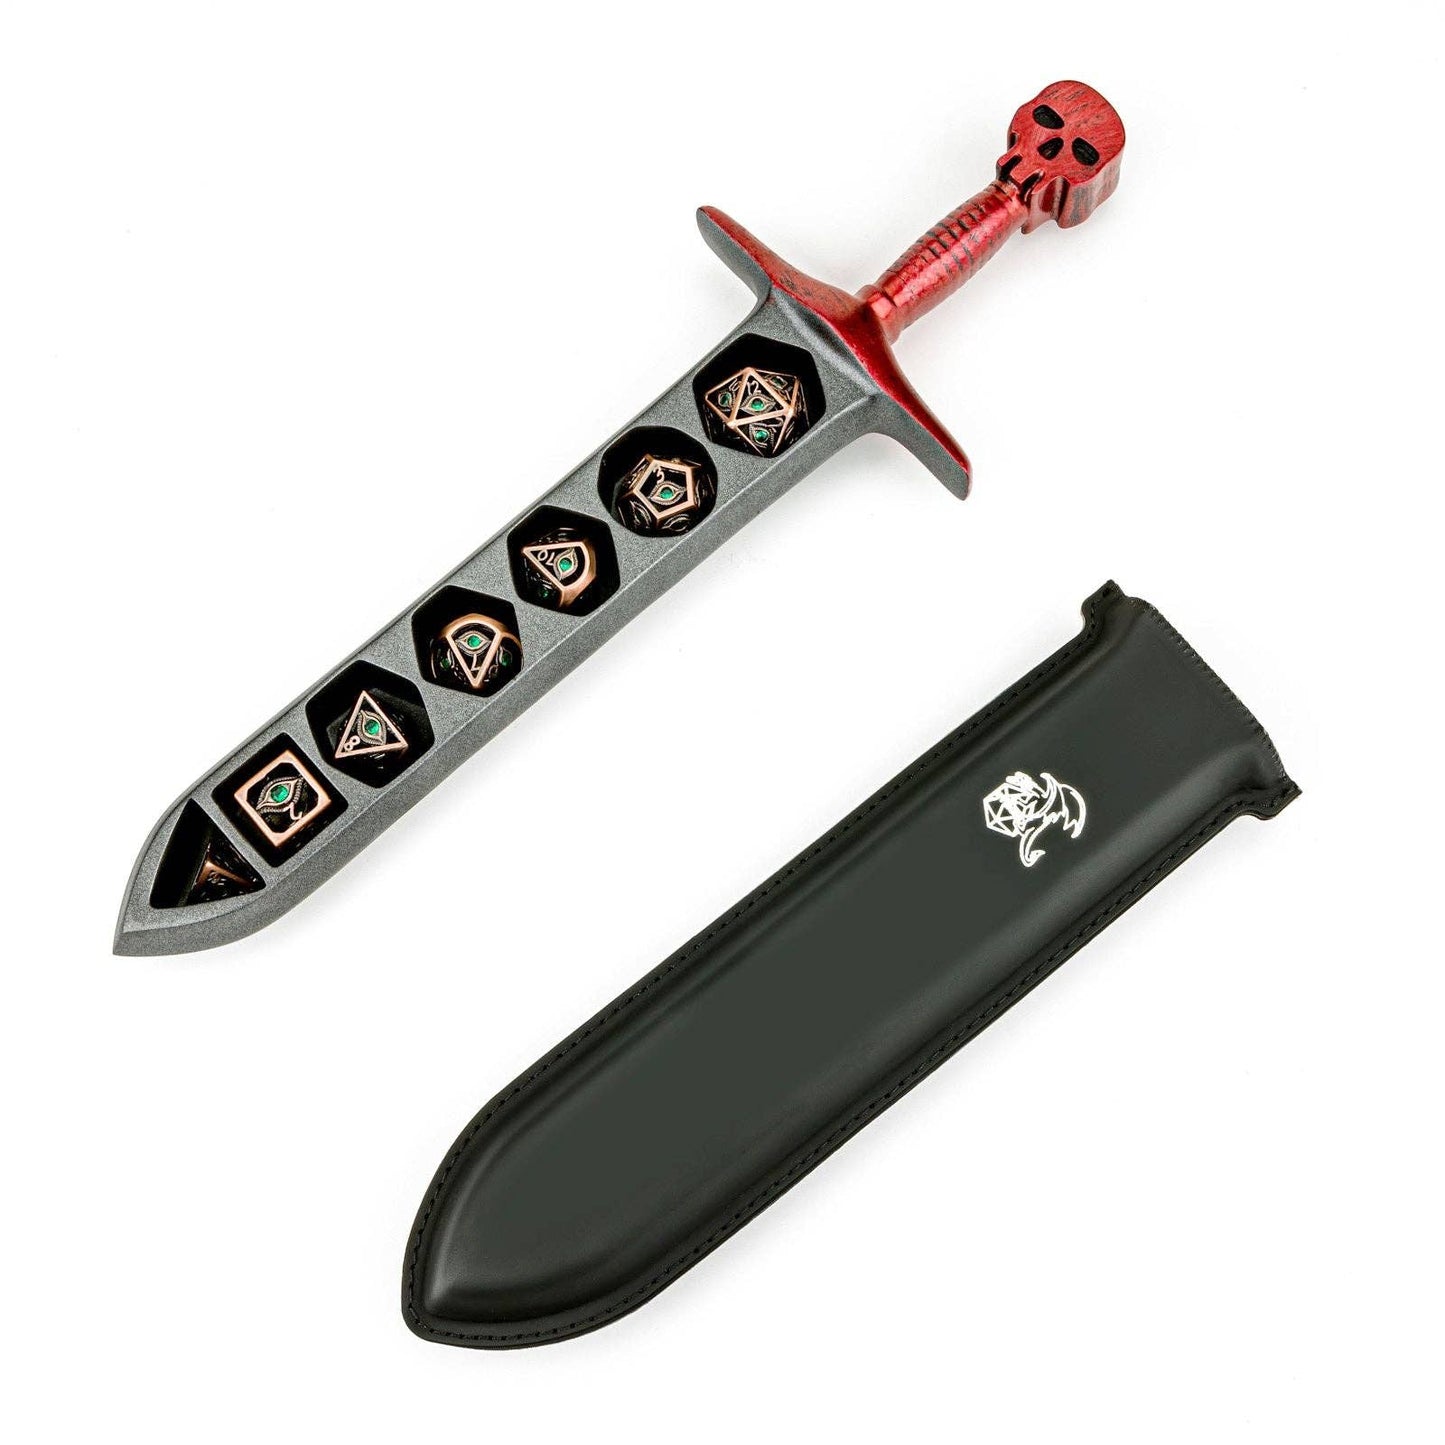 Hymgho Grim Dagger Dice Case with sheath cover - Red